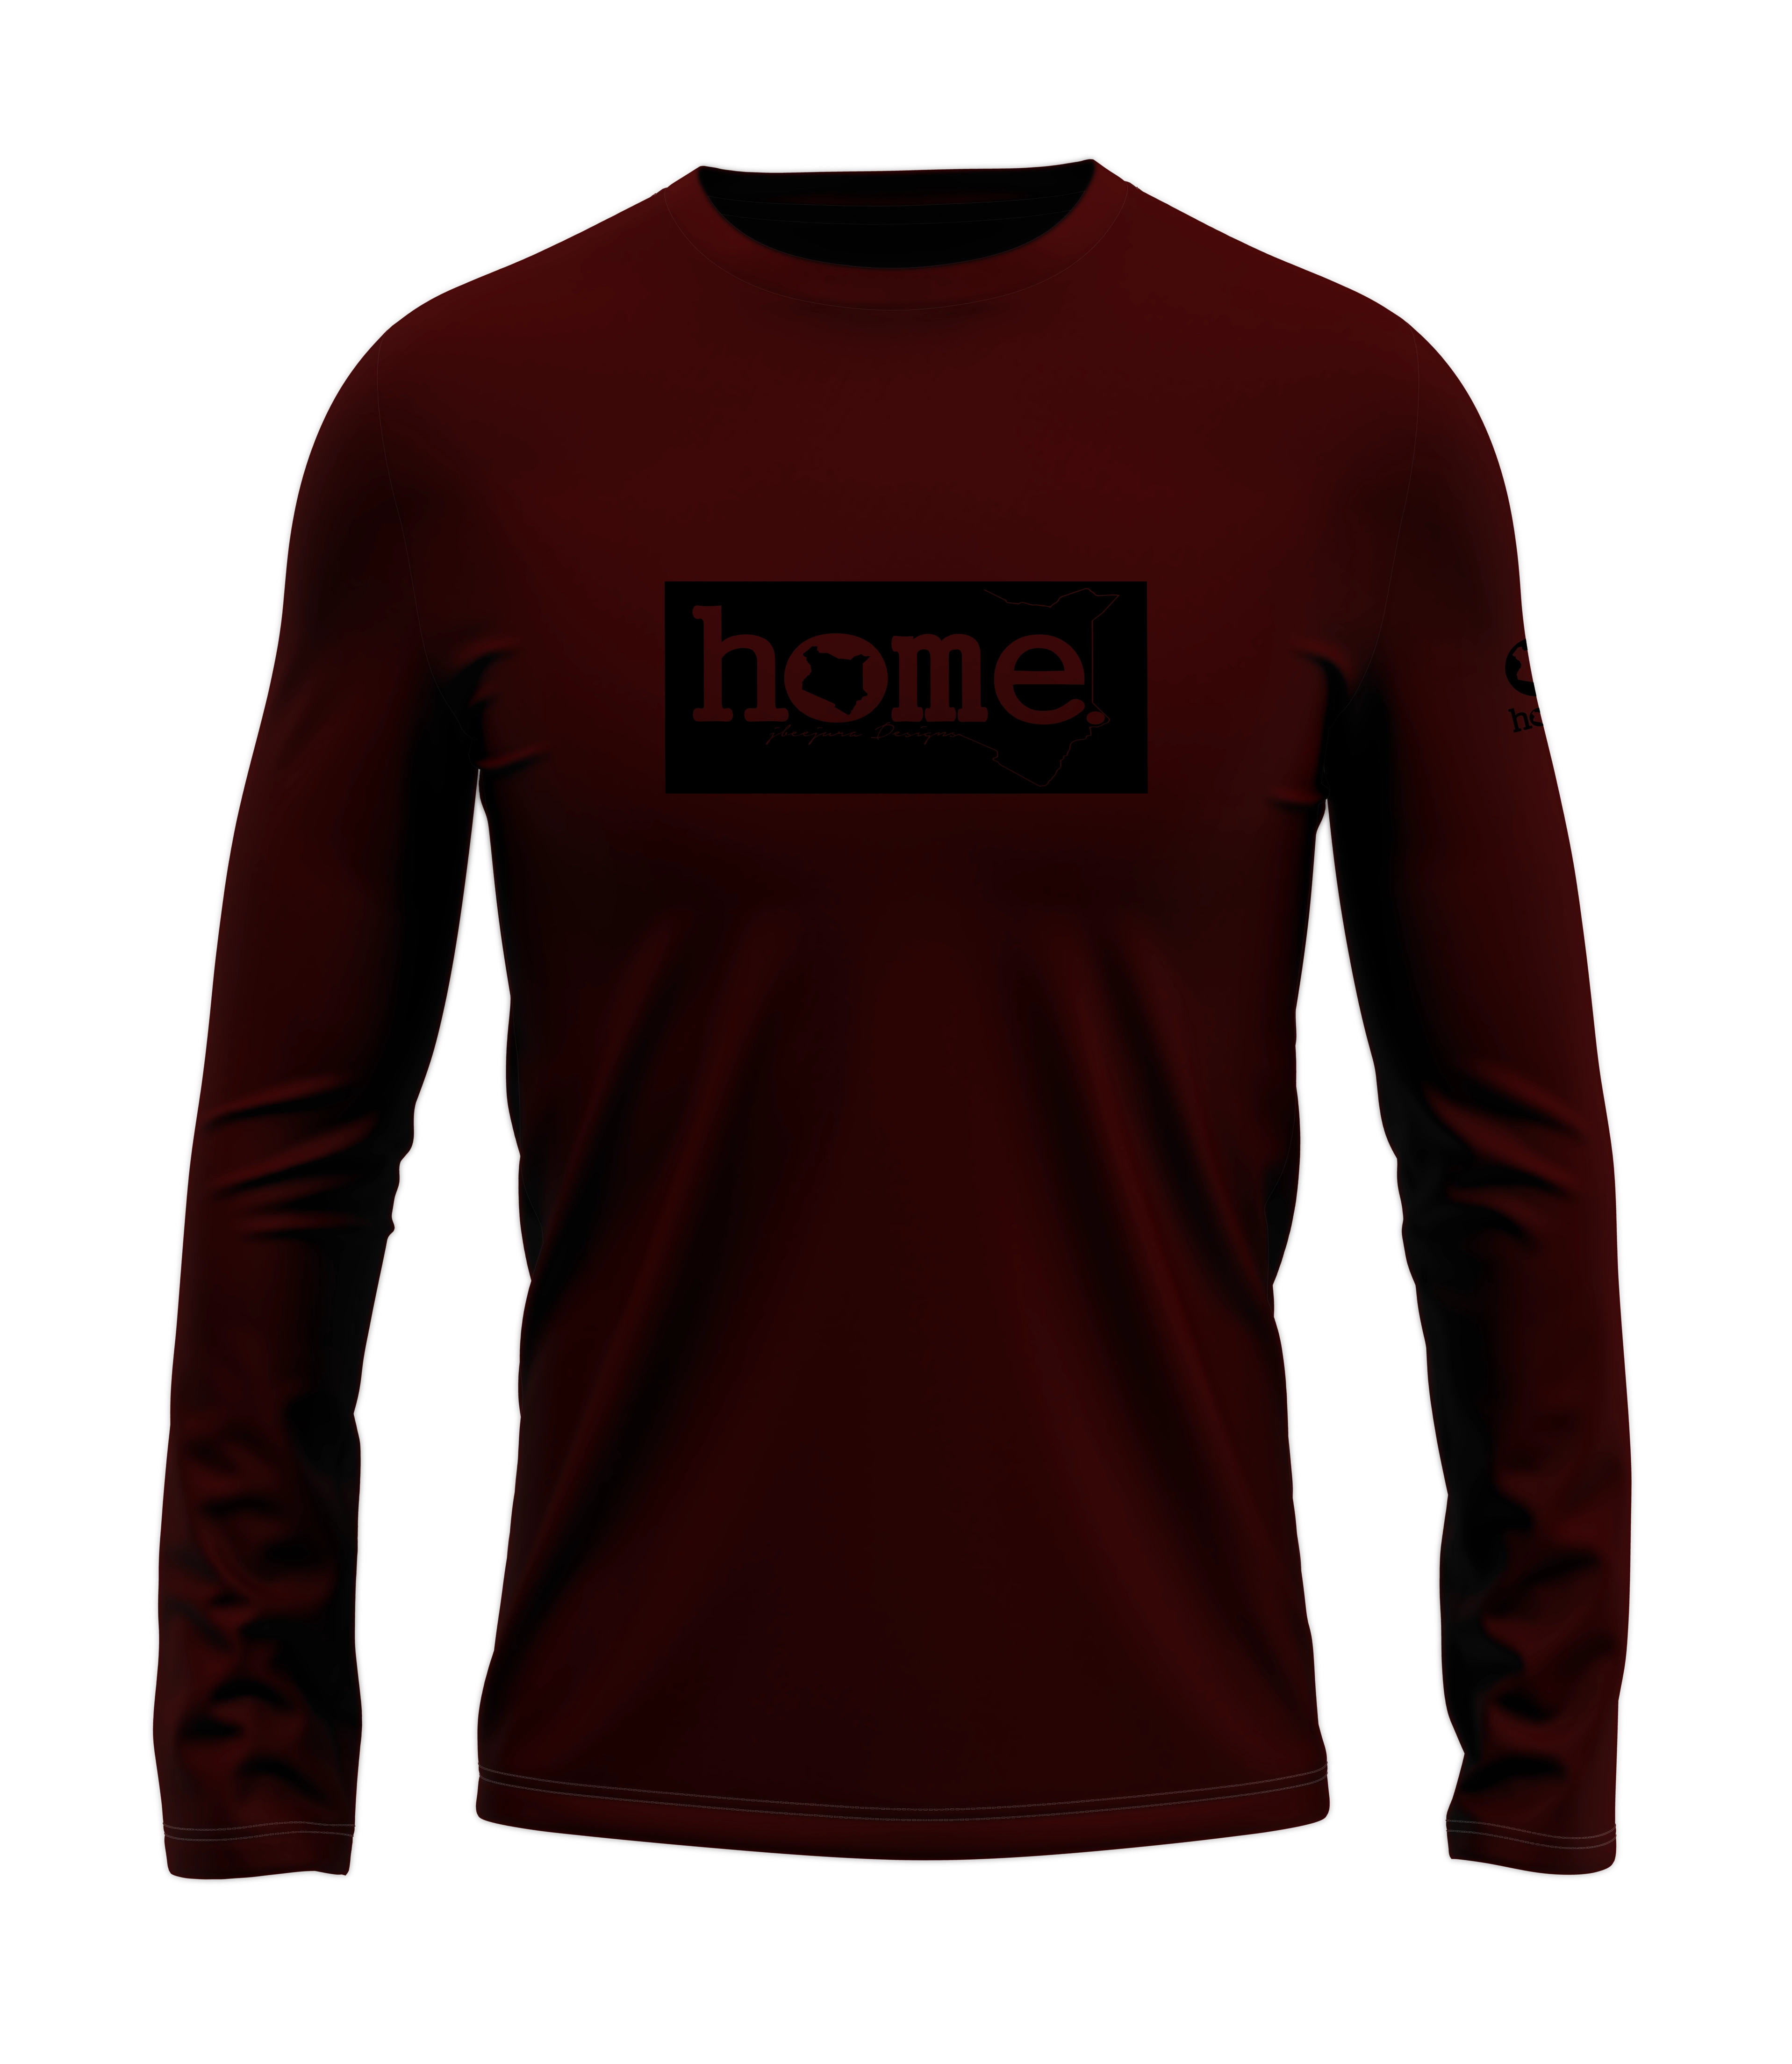 home_254 LONG-SLEEVED MAROON T-SHIRT WITH A BLACK CLASSIC PRINT – COTTON PLUS FABRIC